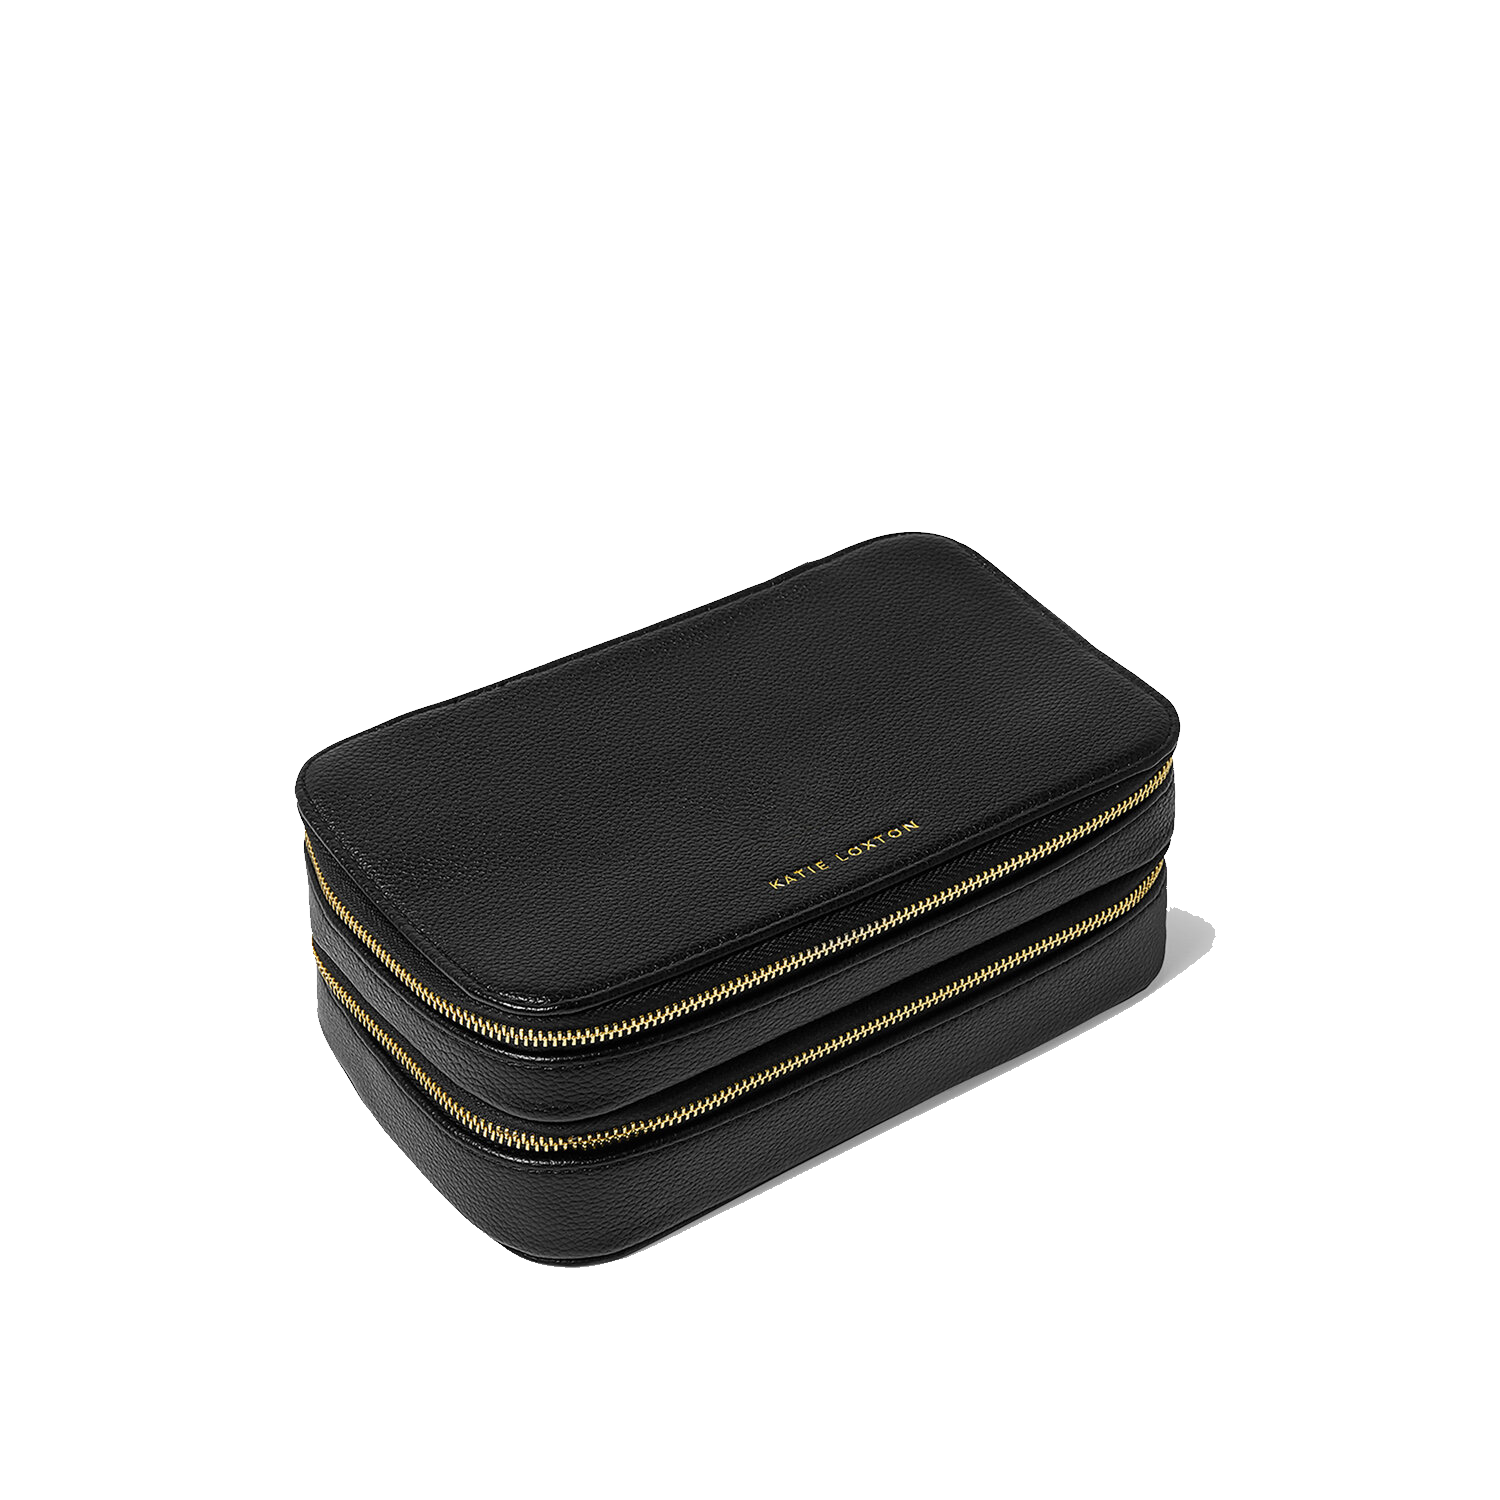 KATIE LOXTON JEWELLERY AND ACCESSORIES TRAVEL CASE BLACK KLB3356